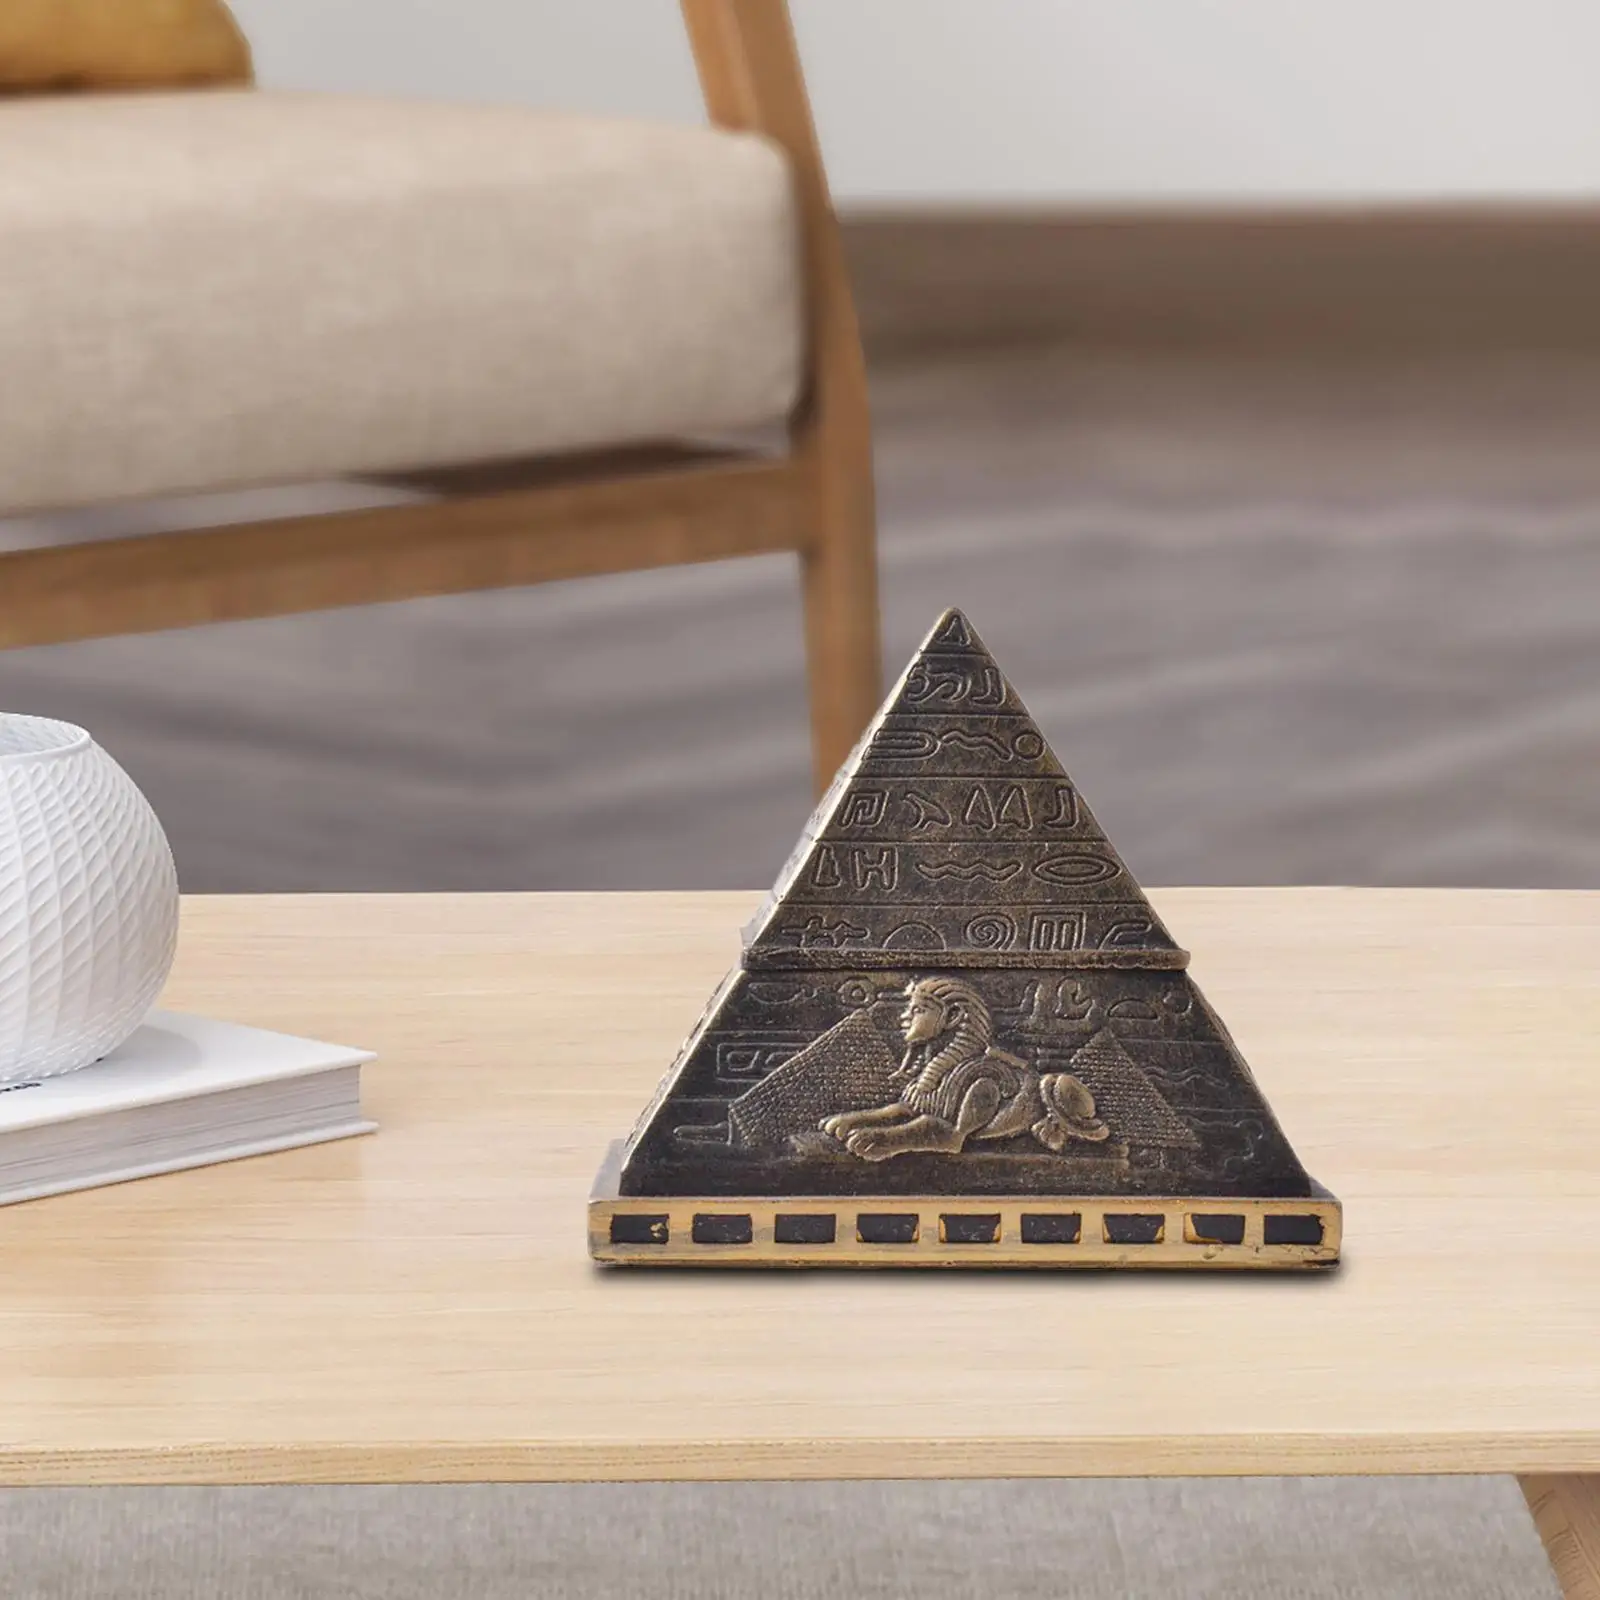  Pyramid Statue Trinket Container Srage Feng Shui Figurines Architecture Deskp Office Souvenir Jewelry Box Ornament